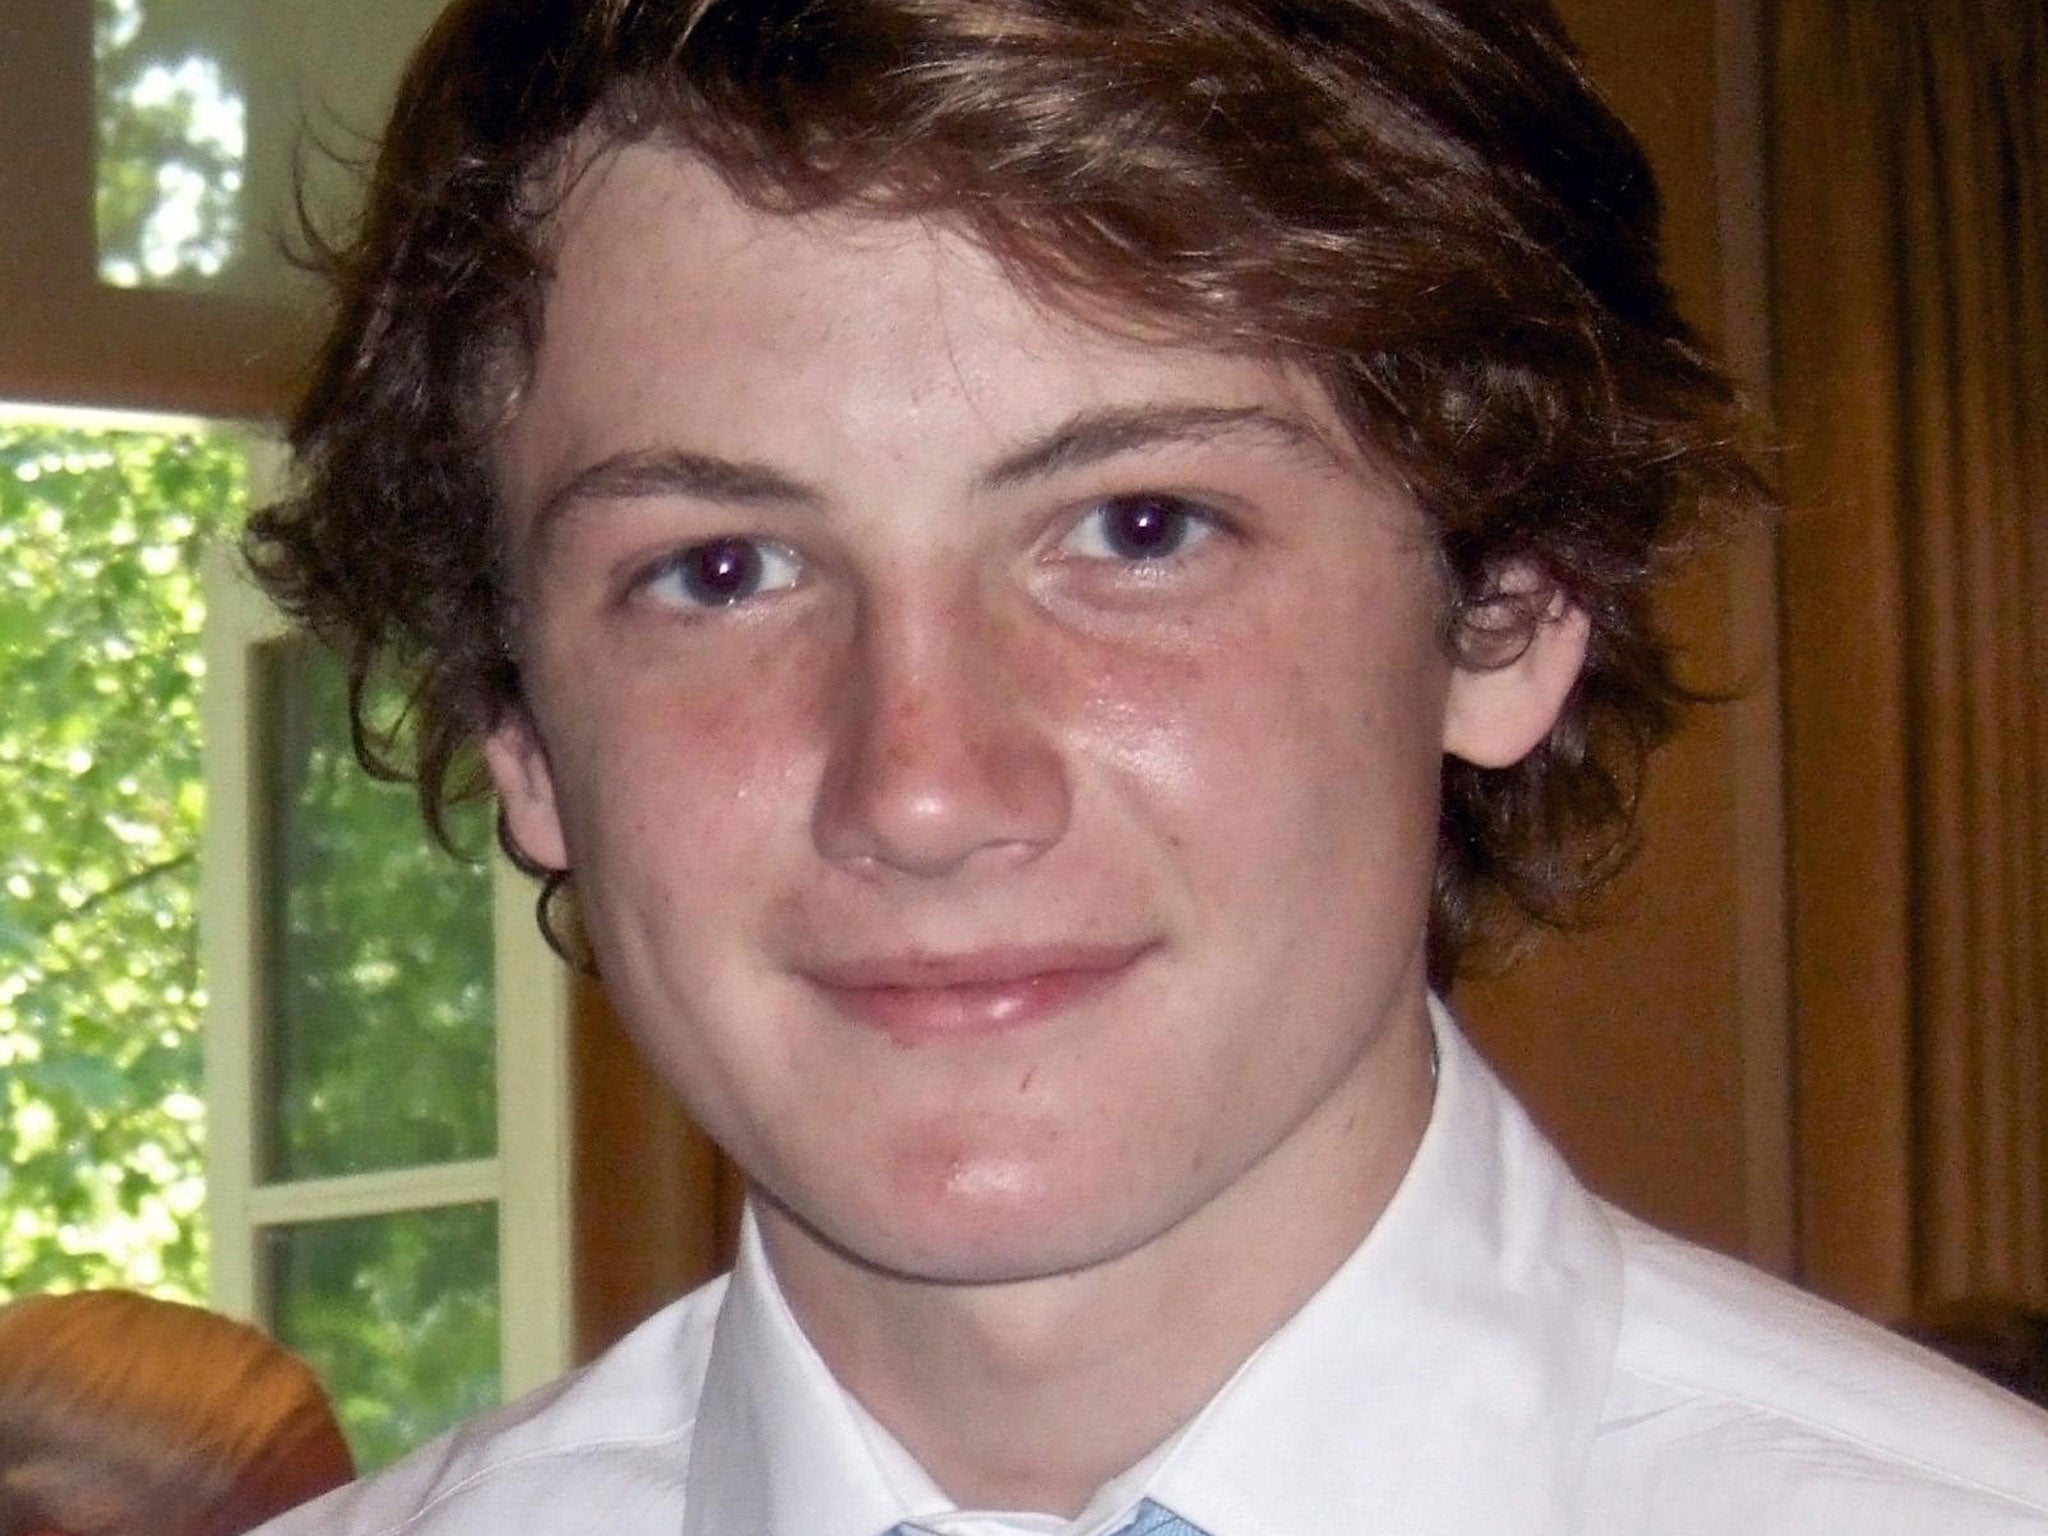 Horatio Chapple, 17, who was dragged out of his tent by a polar bear causing "mortal wounds" an inquest has heard